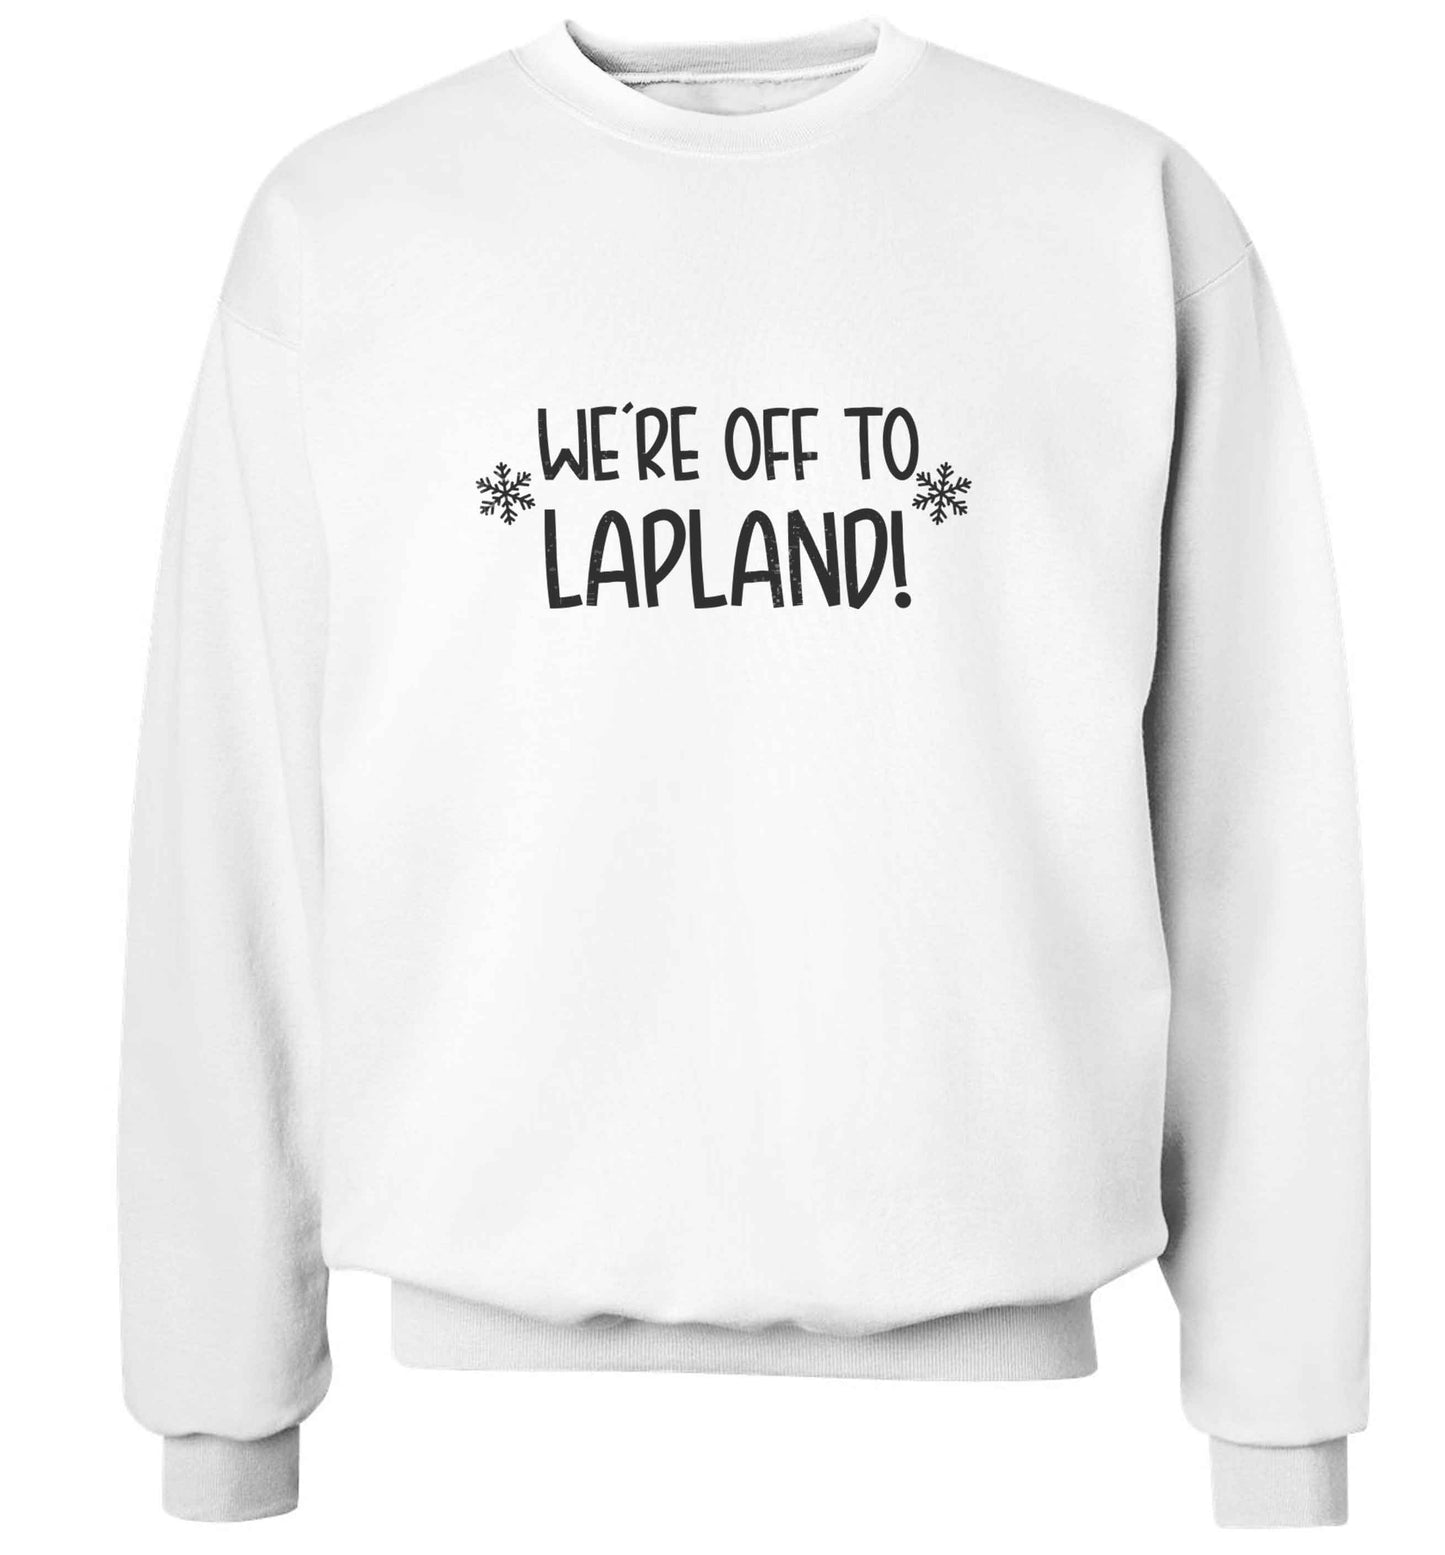 We're off to Lapland adult's unisex white sweater 2XL